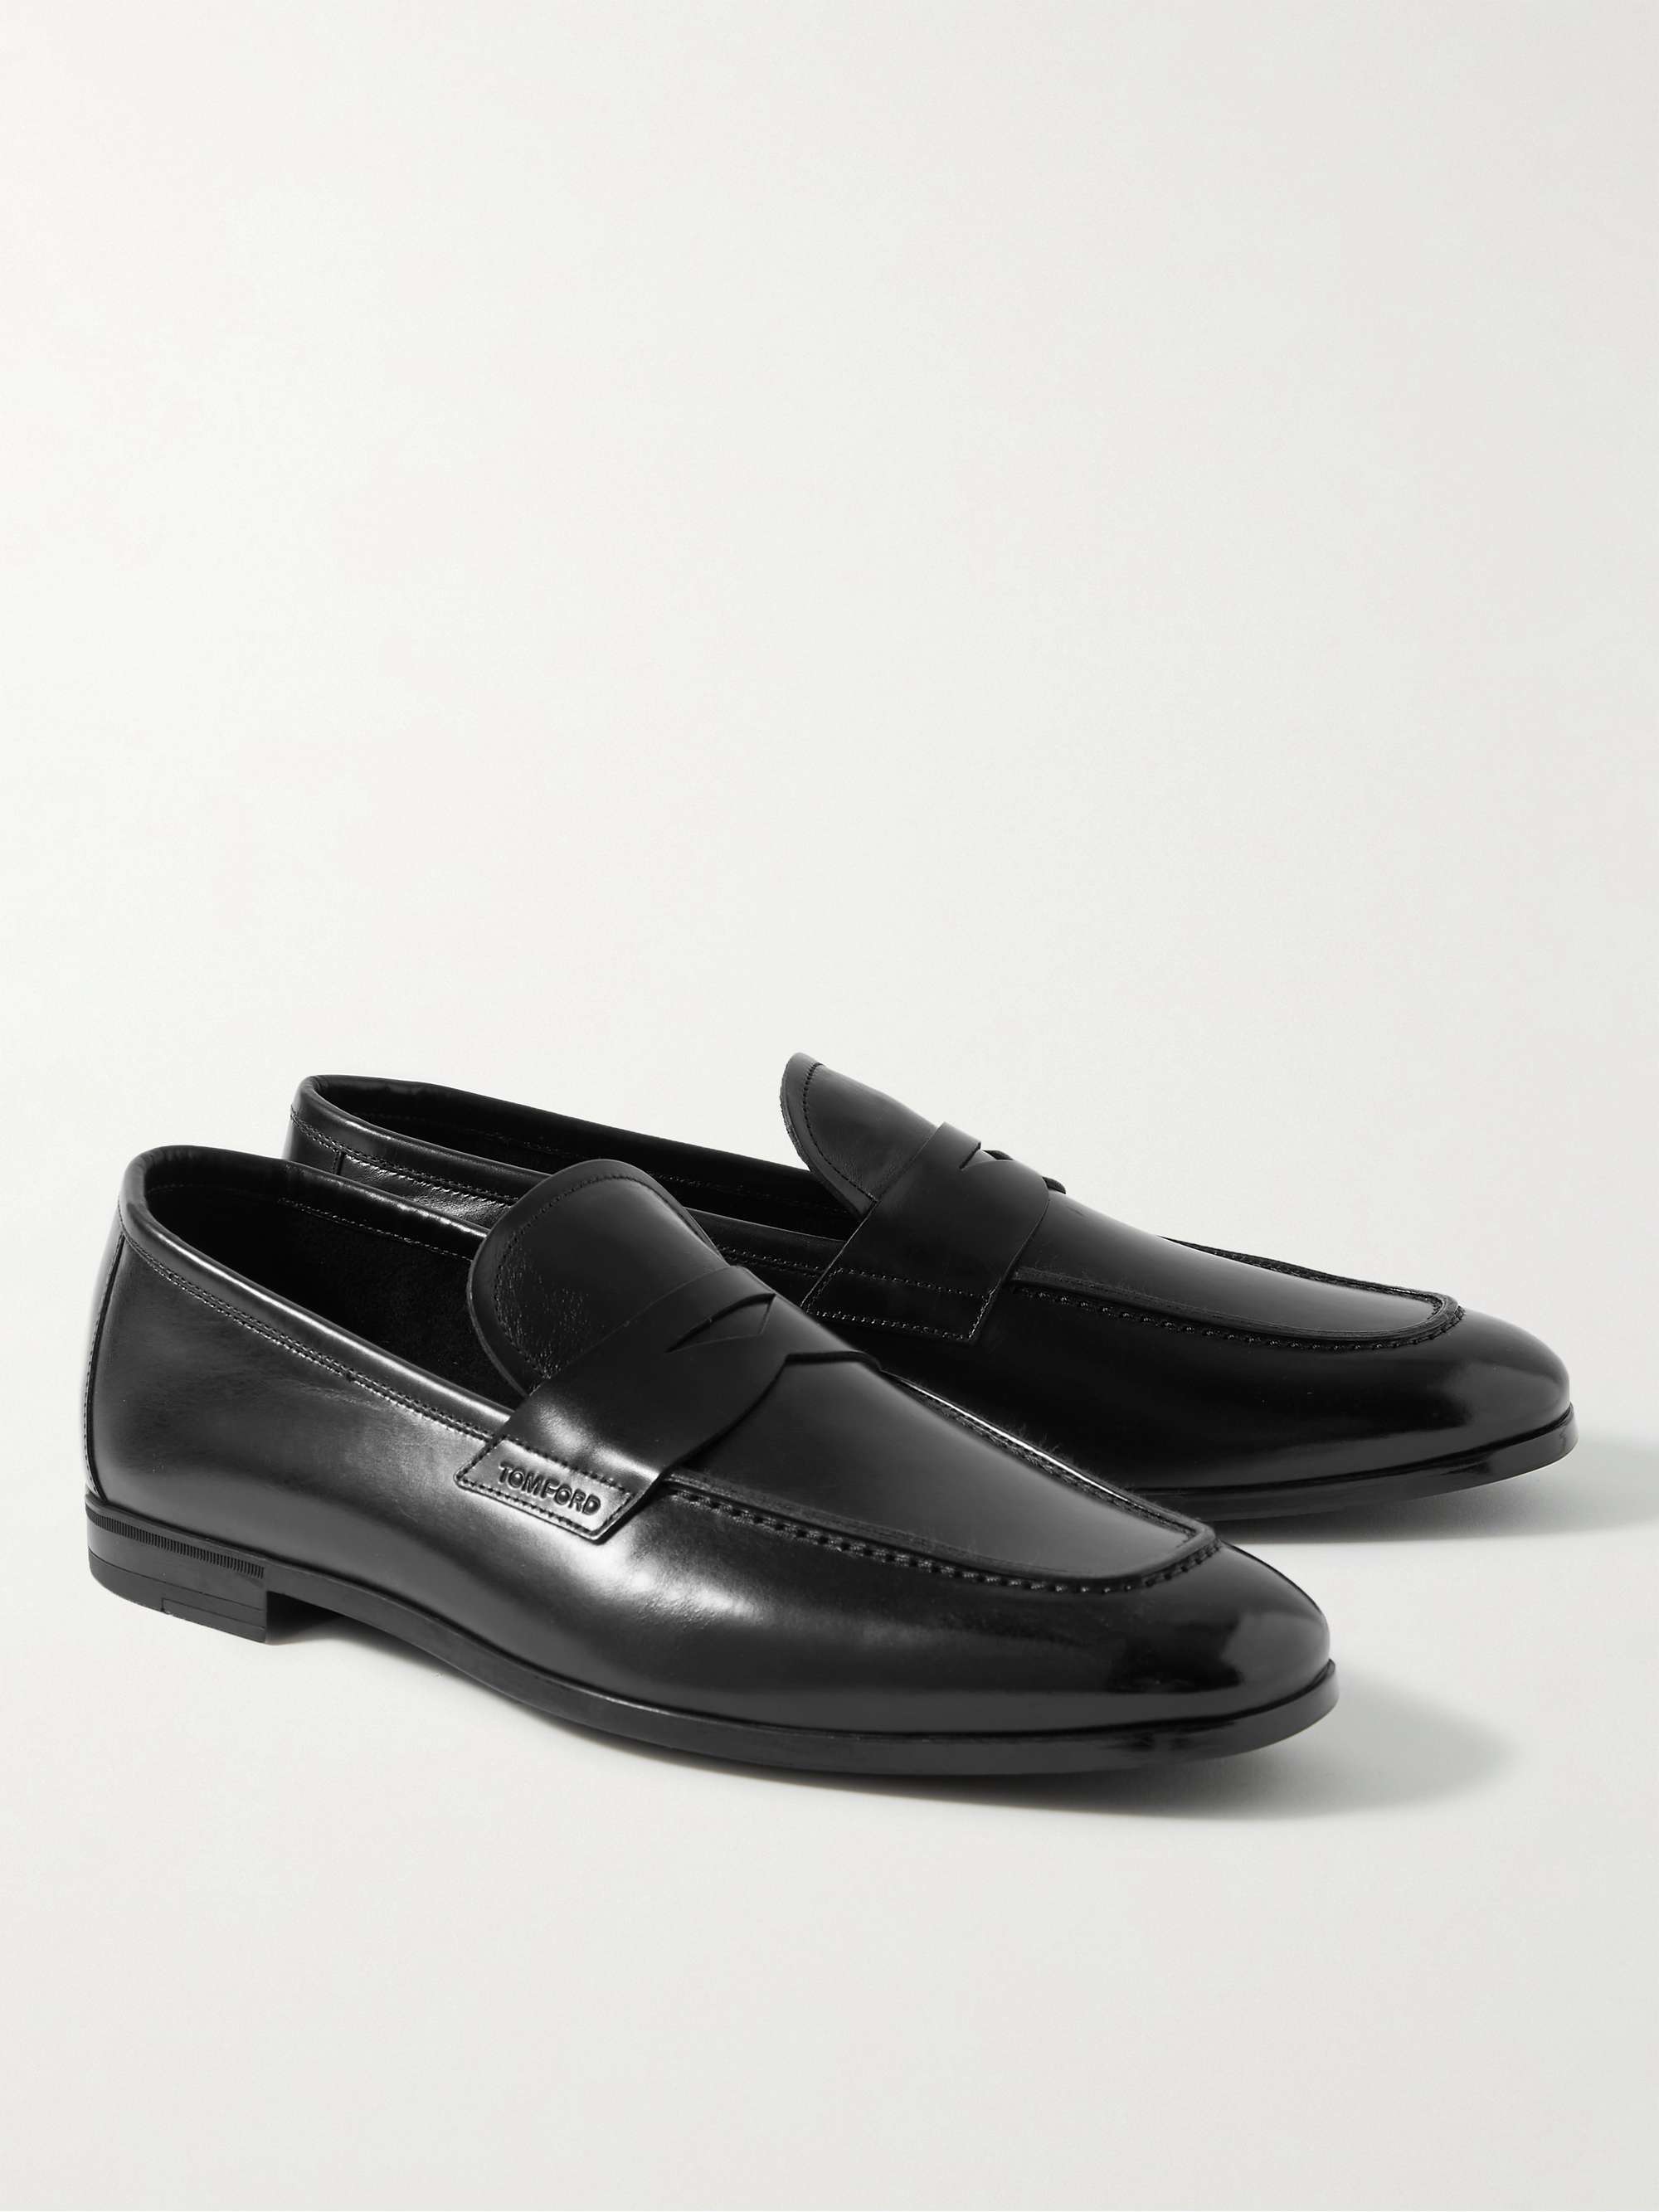 TOM FORD Sean Leather Penny Loafers for Men | MR PORTER